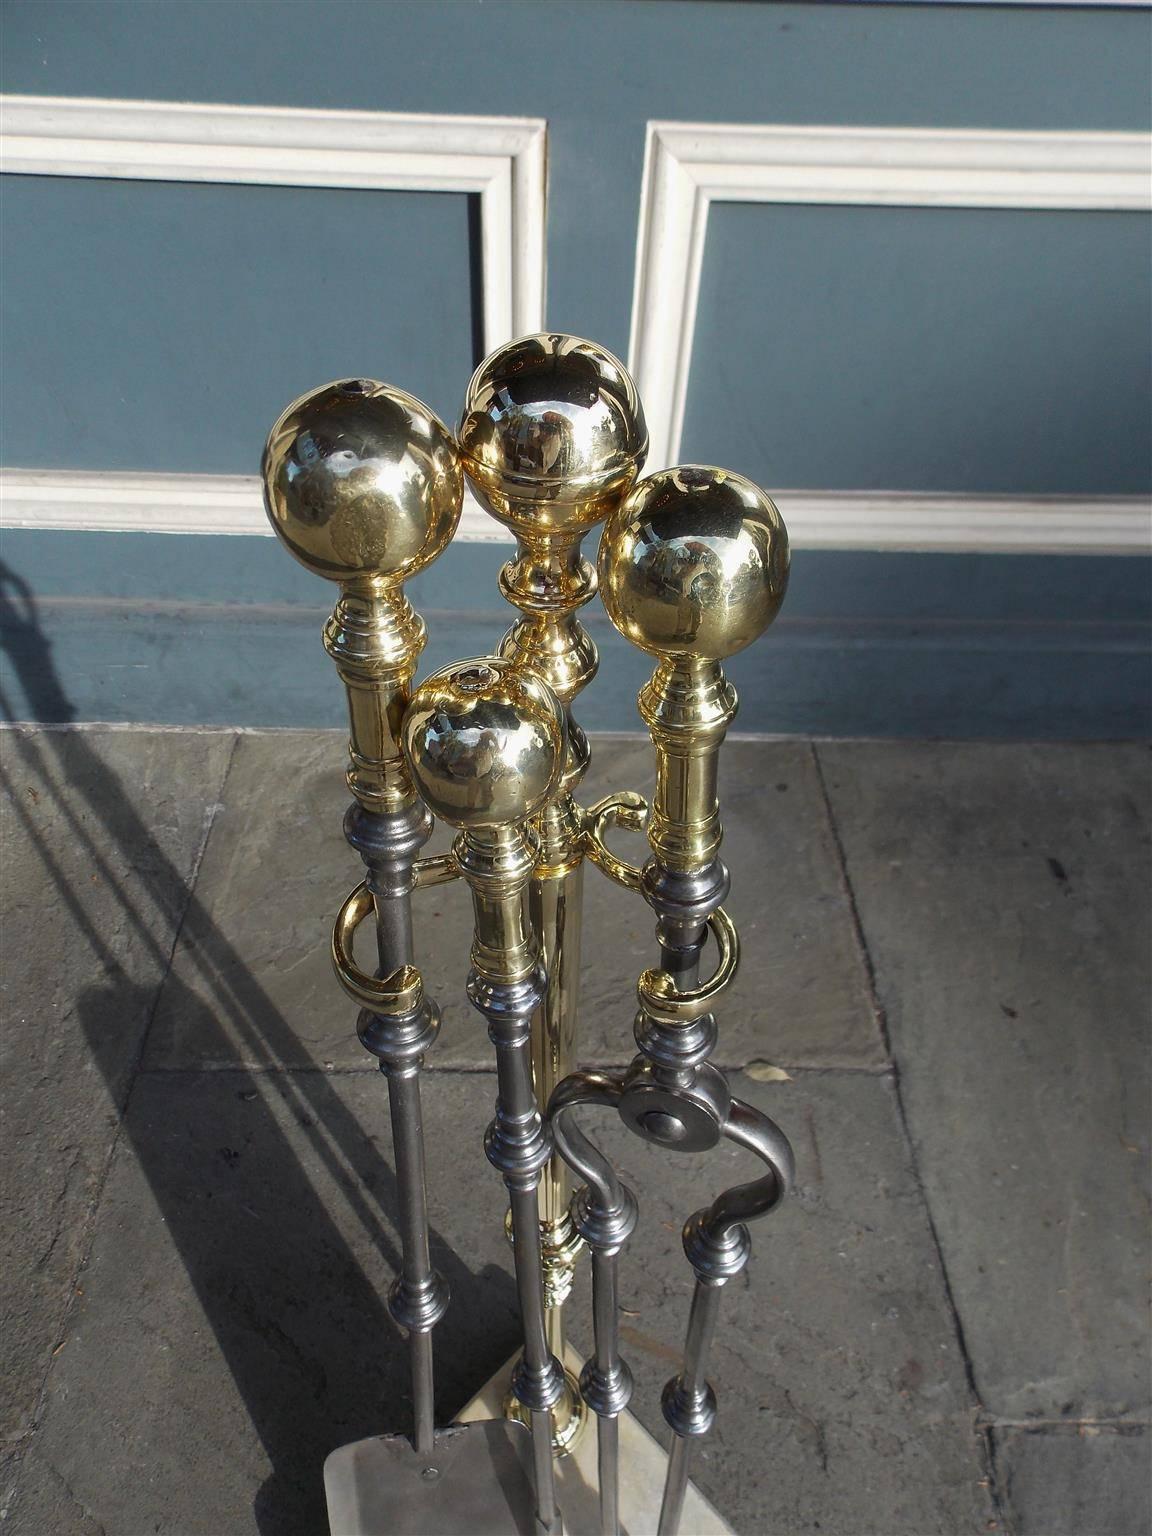 American Colonial Set of American Brass and Steel Fire Tools on Marble Stand, Boston, Circa 1810